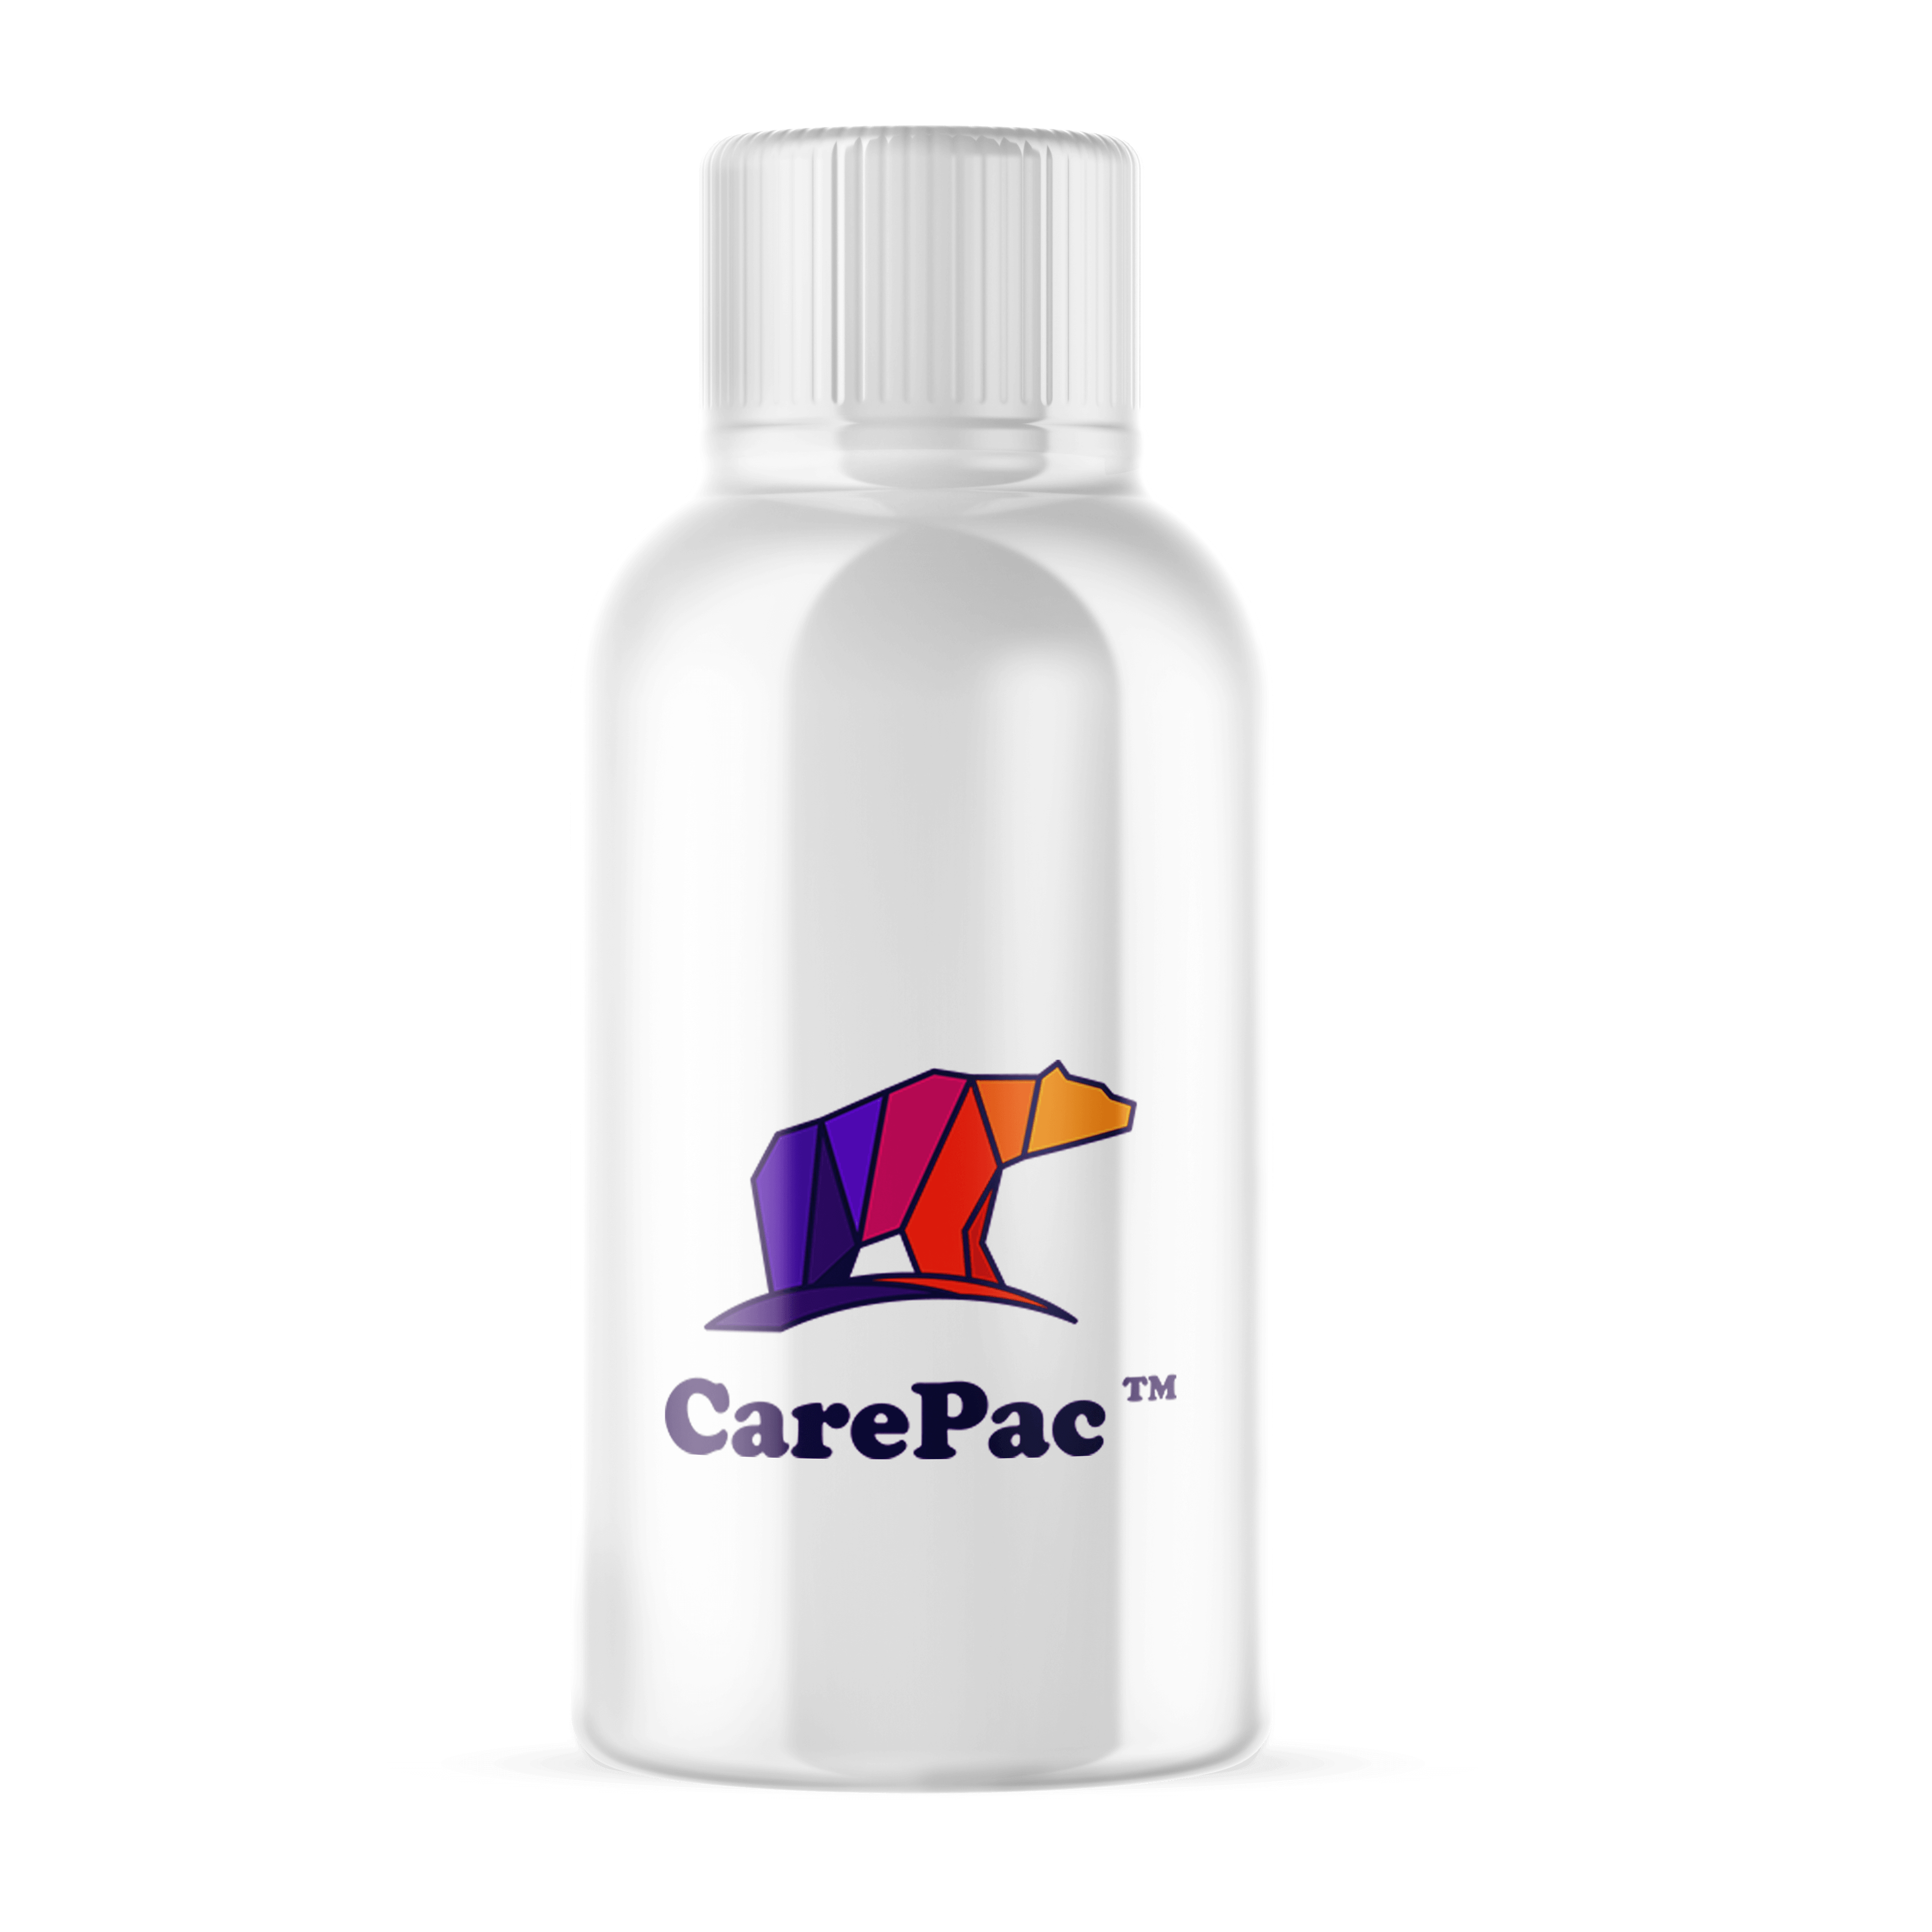 Bottle with white shrink sleeve and the CarePac logo custom printed on the sleeve